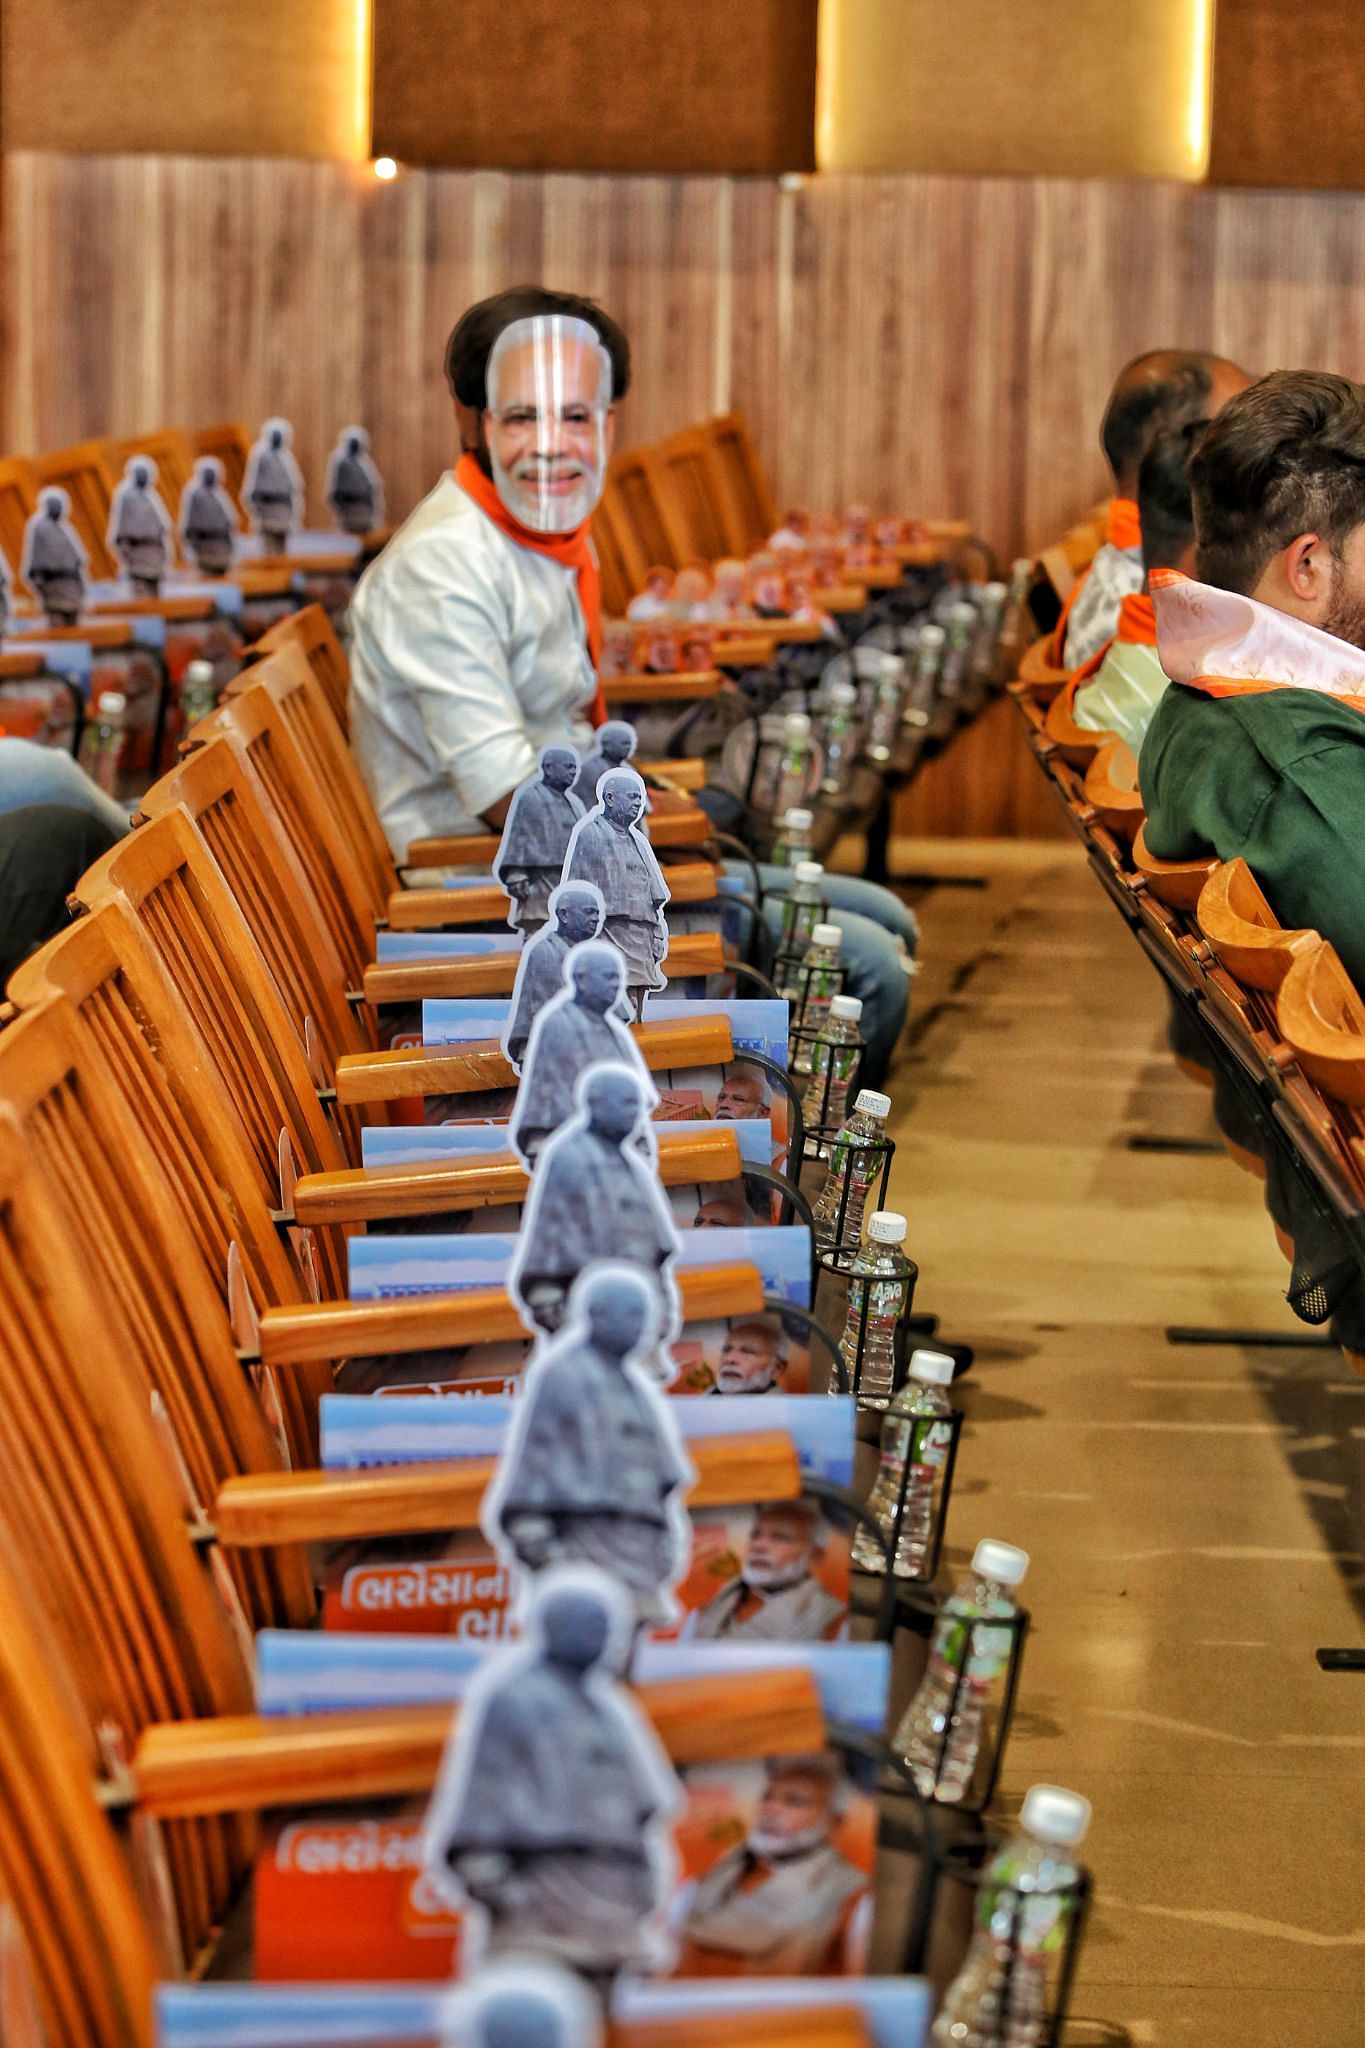 November 2022: BJP’s campaign in Gujarat was in full swing. PM Modi, and ministers Amit Shah, Rajnath Singh, Smriti Irani and party president J.P. Nadda all reached Gujarat for campaigning. This photo was taken at BJP’s manifesto launch, where Bhupendra Patel was also present. The BJP office in Ahmedabad had chairs decorated with Modi’s posters and Vallabhbhai Patel stickers | Praveen Jain, ThePrint